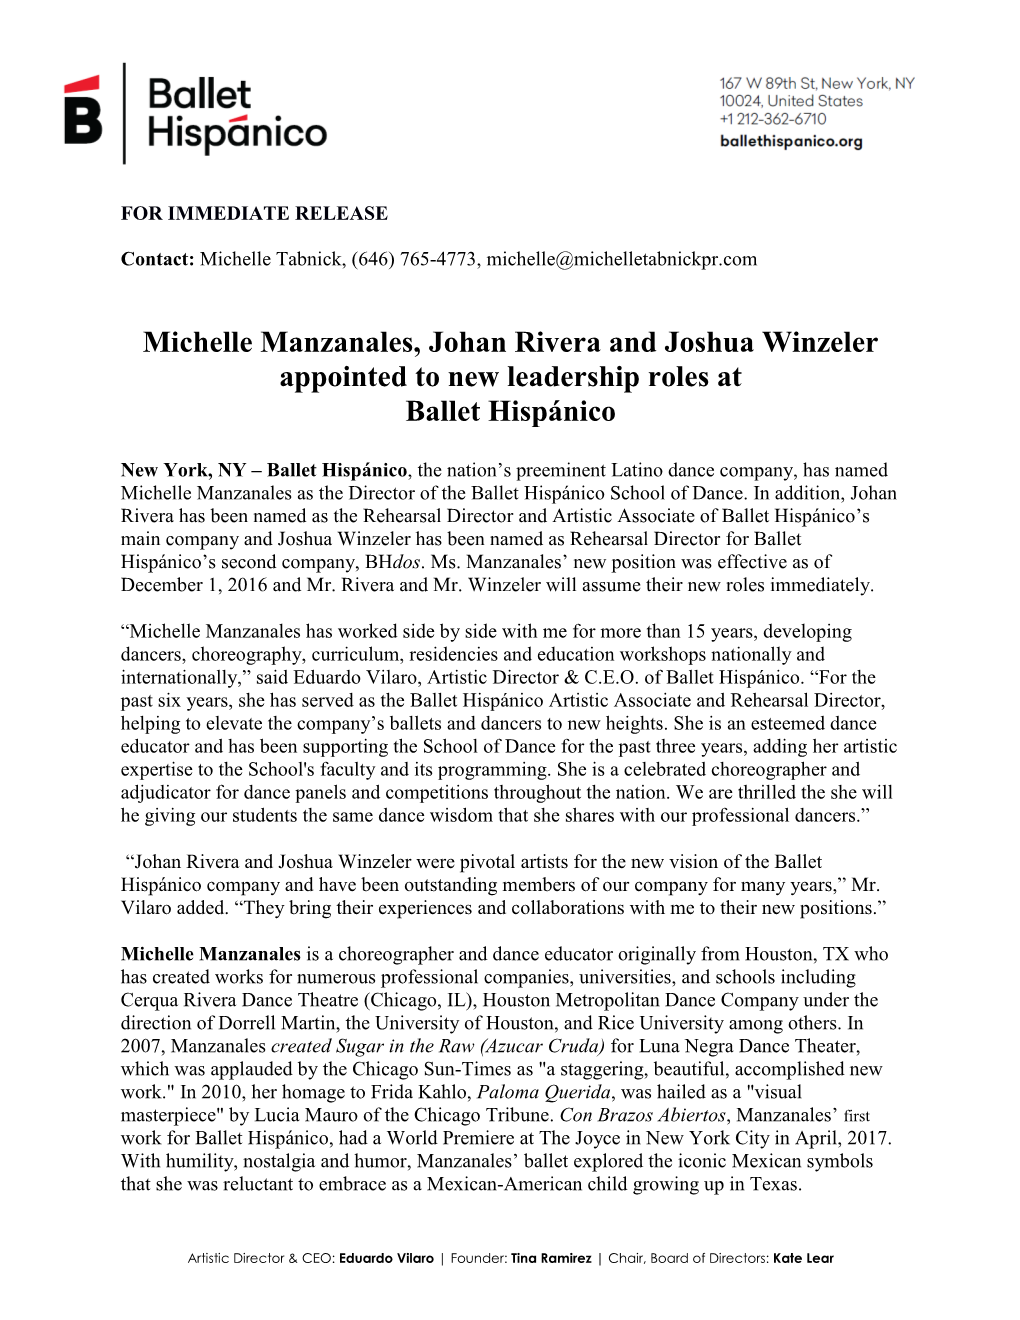 Michelle Manzanales, Johan Rivera and Joshua Winzeler Appointed to New Leadership Roles at Ballet Hispánico